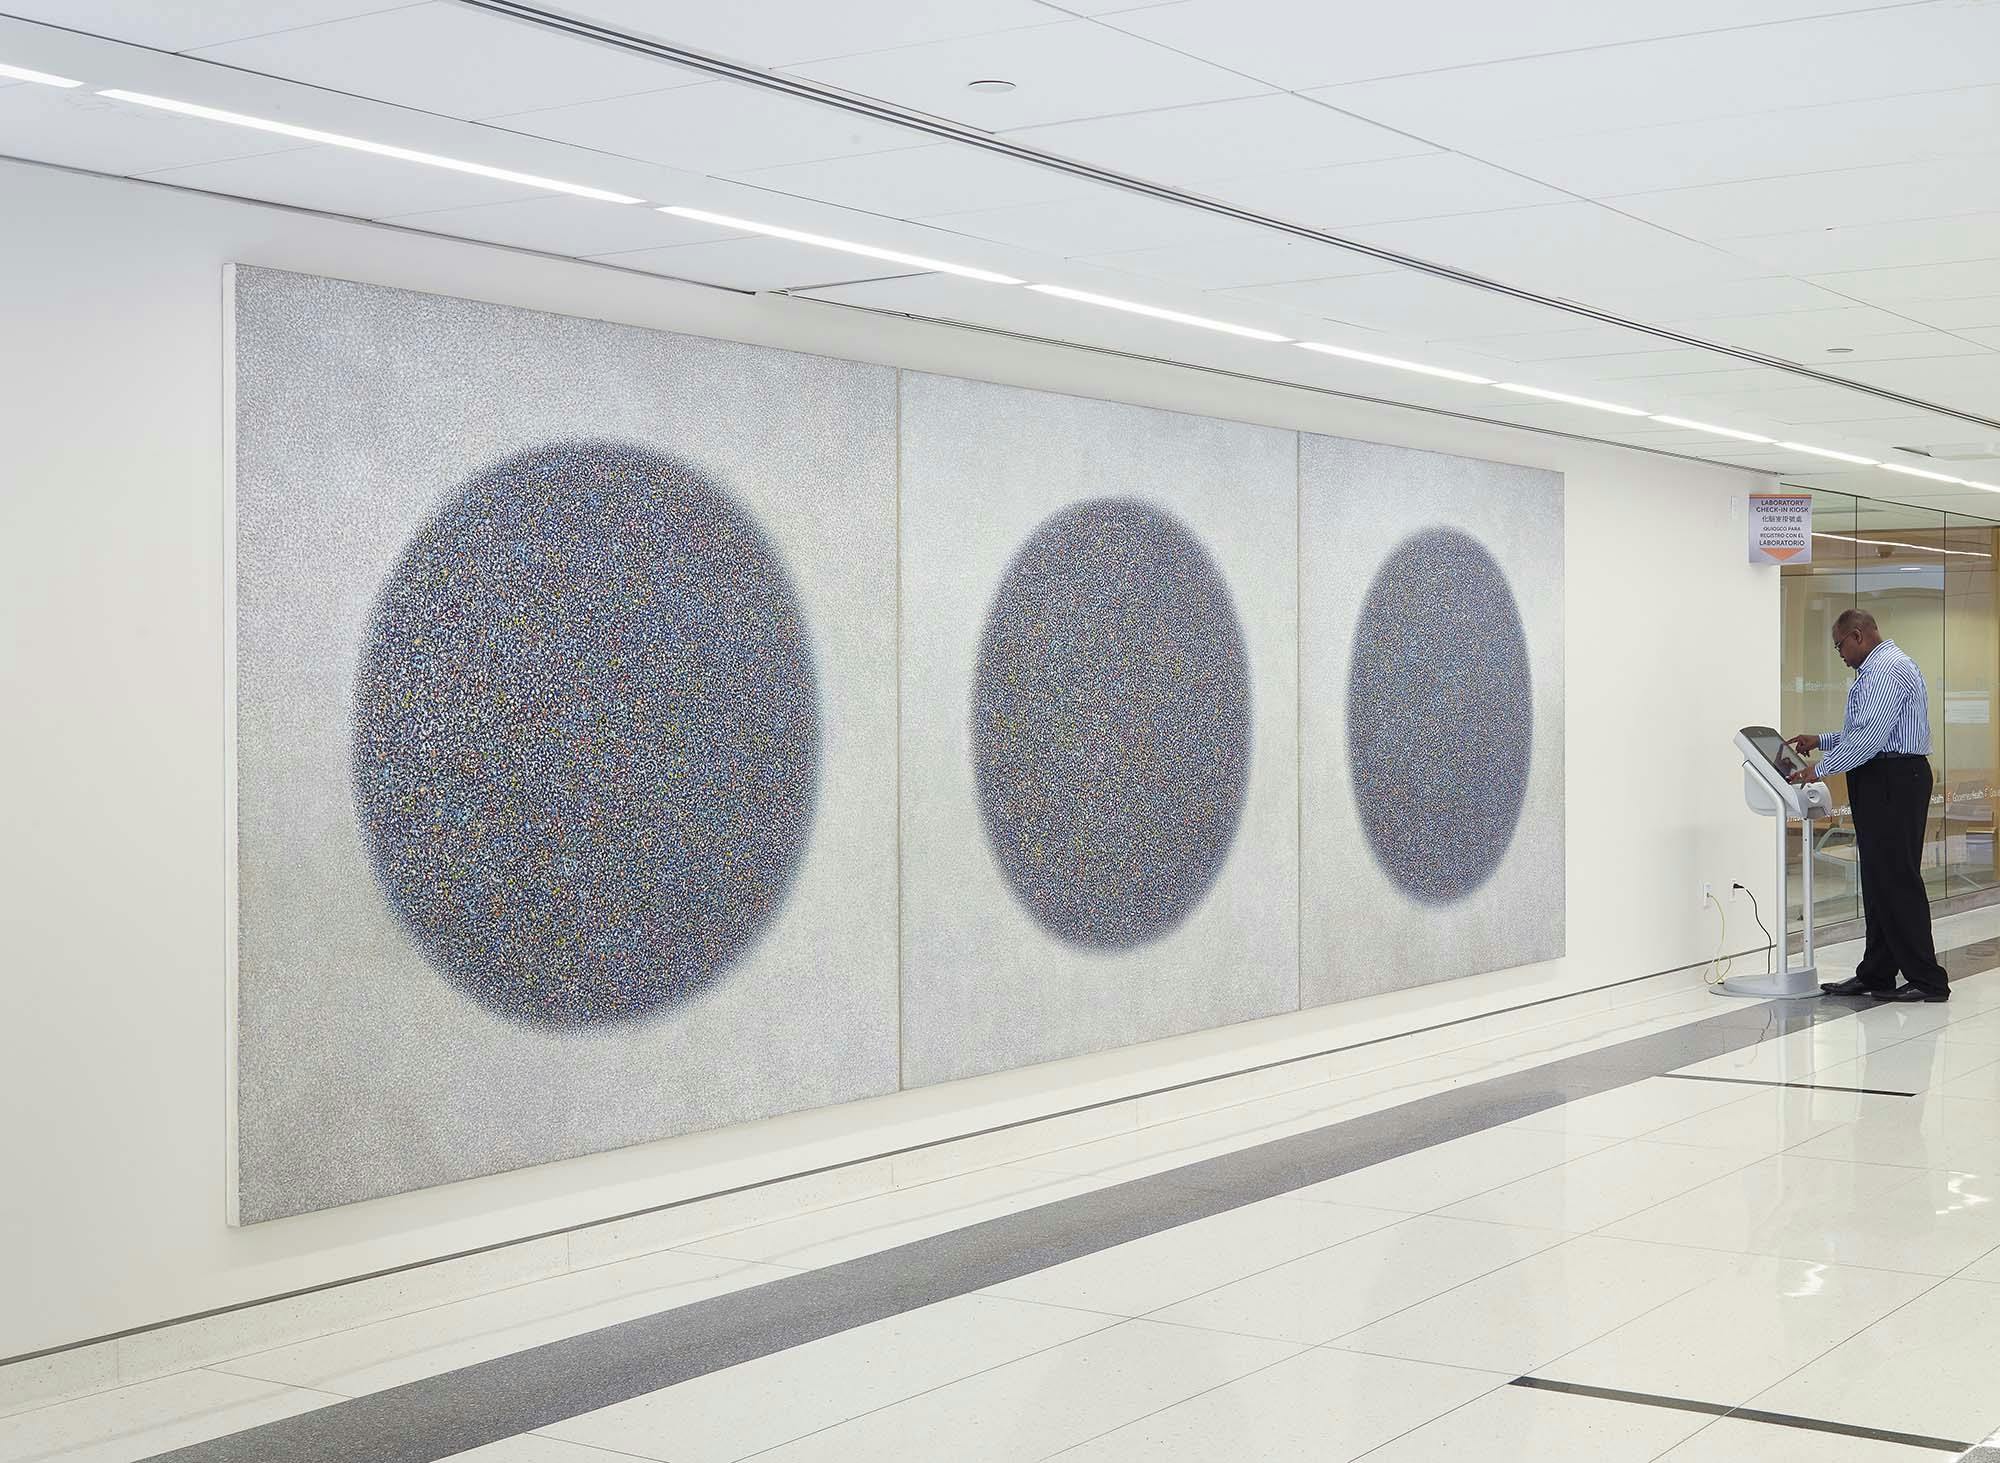 Presence, Healing Circles
1973–74
Acrylic on canvas
84 x 252 in. (213.4 x 640.1 cm)  
North Central Bronx Hospital in Coorperation with New York State Facilities and Development Corporation
 – The Richard Pousette-Dart Foundation